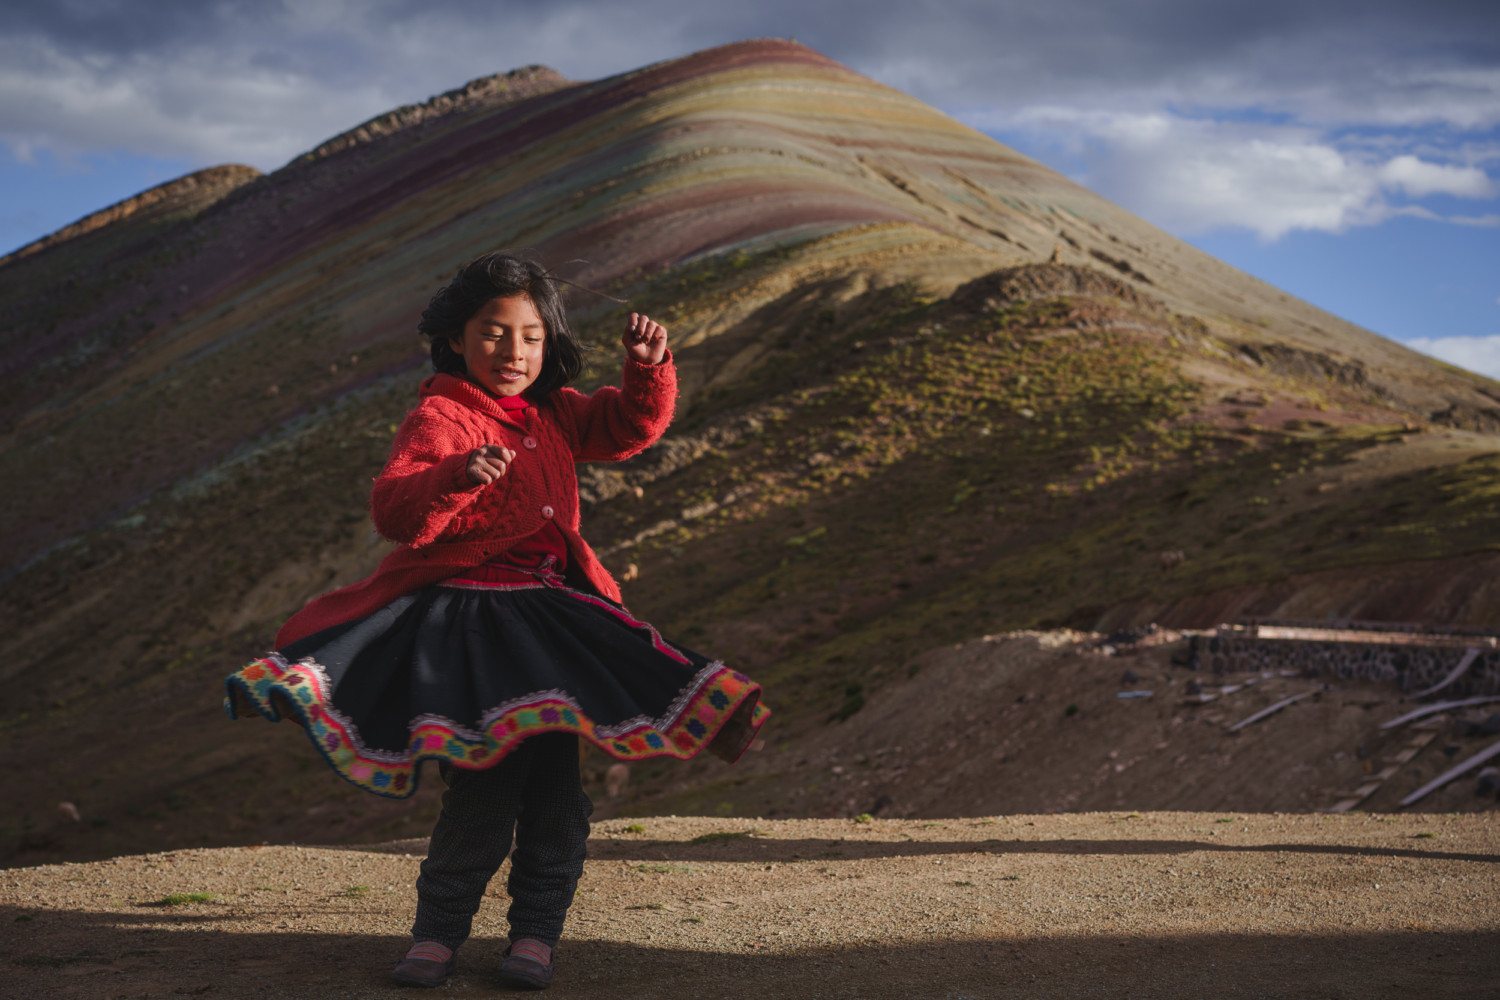 Dancing in front of the rainbow mountains | Peru Photo Tour with raw.tours